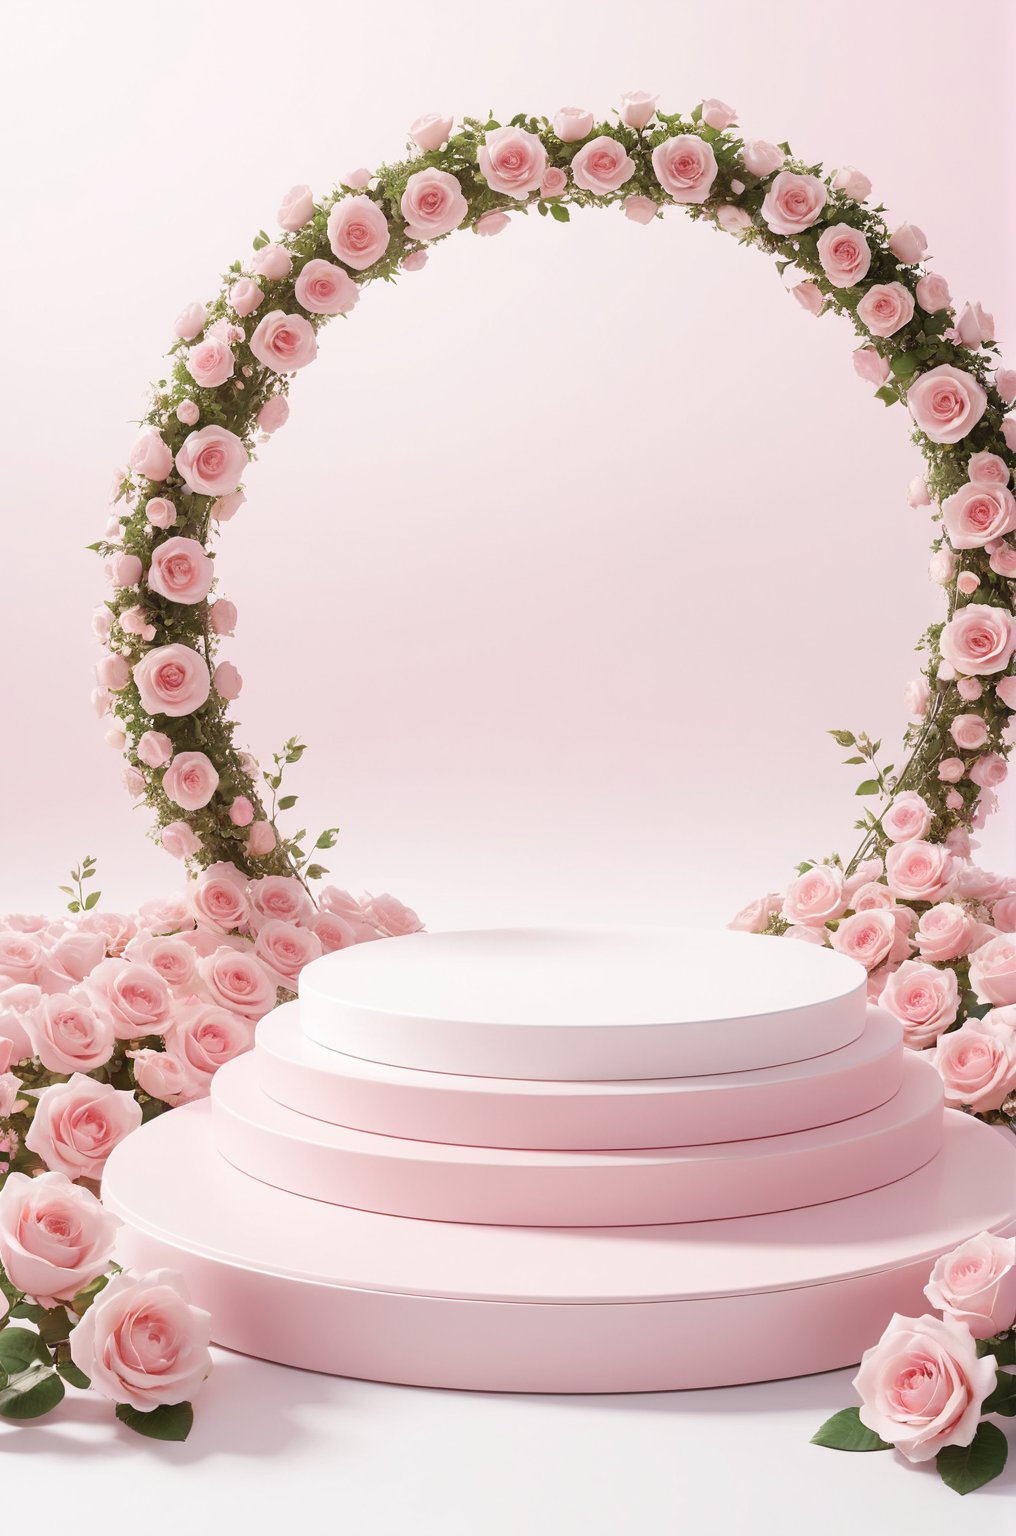 3D\(hubgstyle)\,
a round podium on the ground in the middle, white background, lots of pink roses, 

professional 3d model, anime artwork pixar, 3d style, good shine, OC rendering, highly detailed, volumetric, dramatic lighting, 